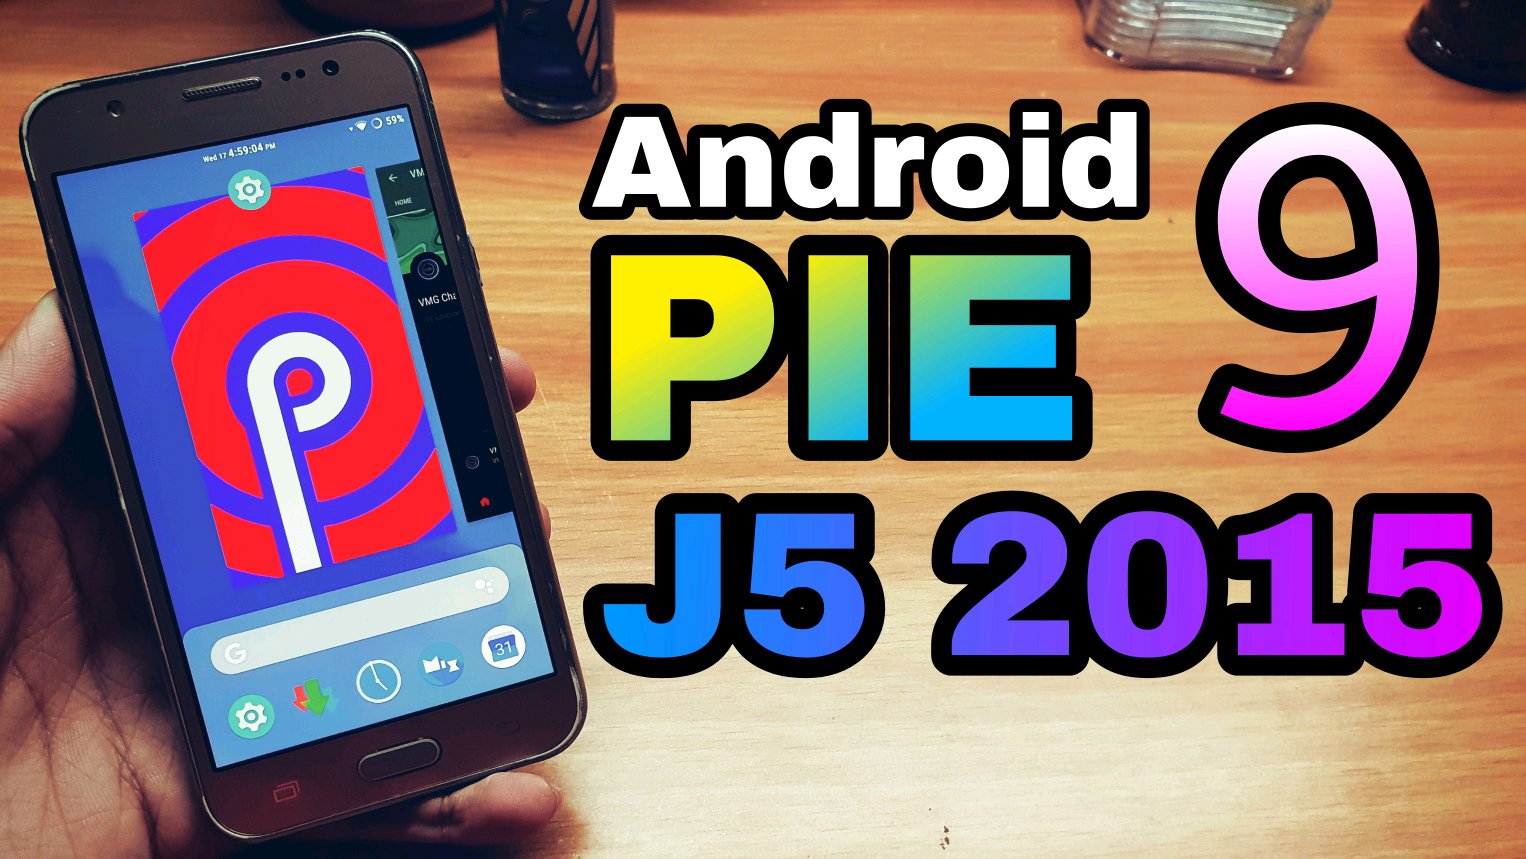 Android Pie 9 update for Galaxy J5 2015! - Samsung Members